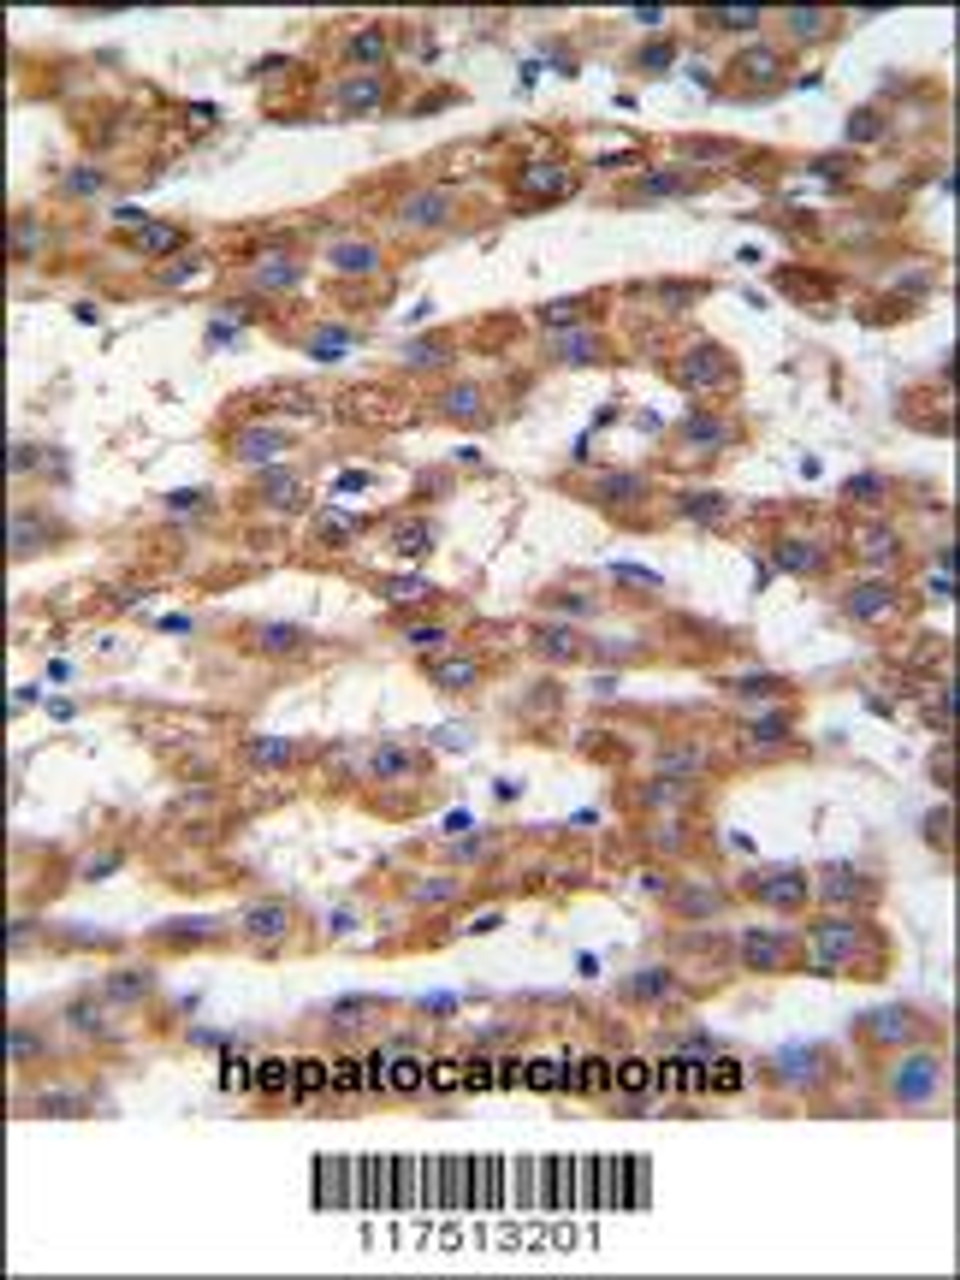 Formalin-fixed and paraffin-embedded human hepatocarcinoma tissue reacted with PHB antibody, which was peroxidase-conjugated to the secondary antibody, followed by DAB staining.